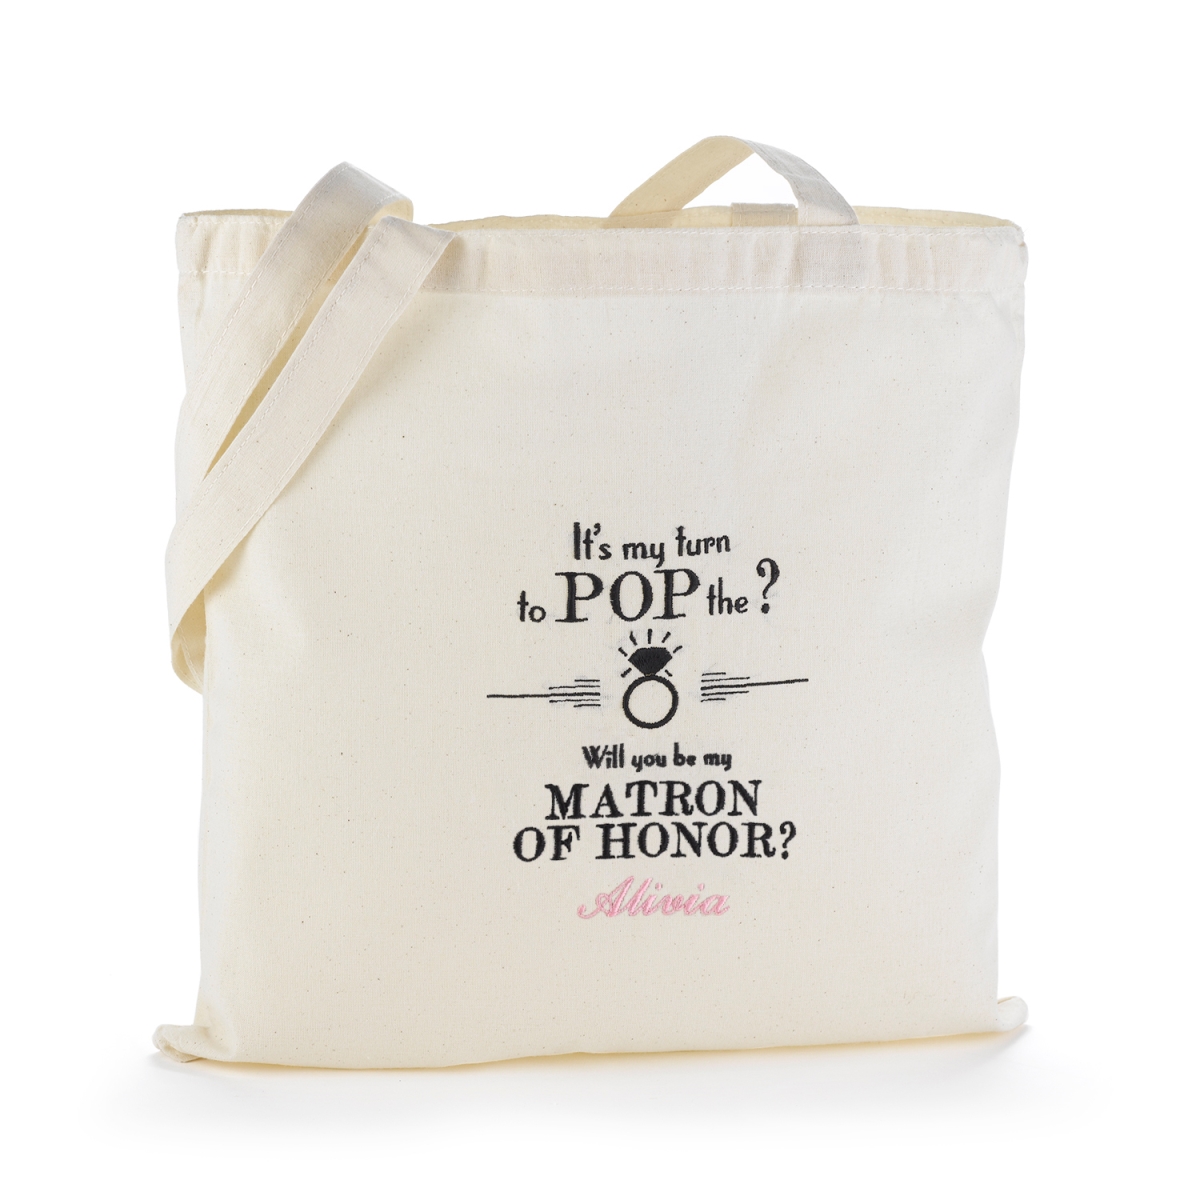 Hortense B. Hewitt 50038p Pop The Question Tote Bag - Matron Of Honor - Personalized